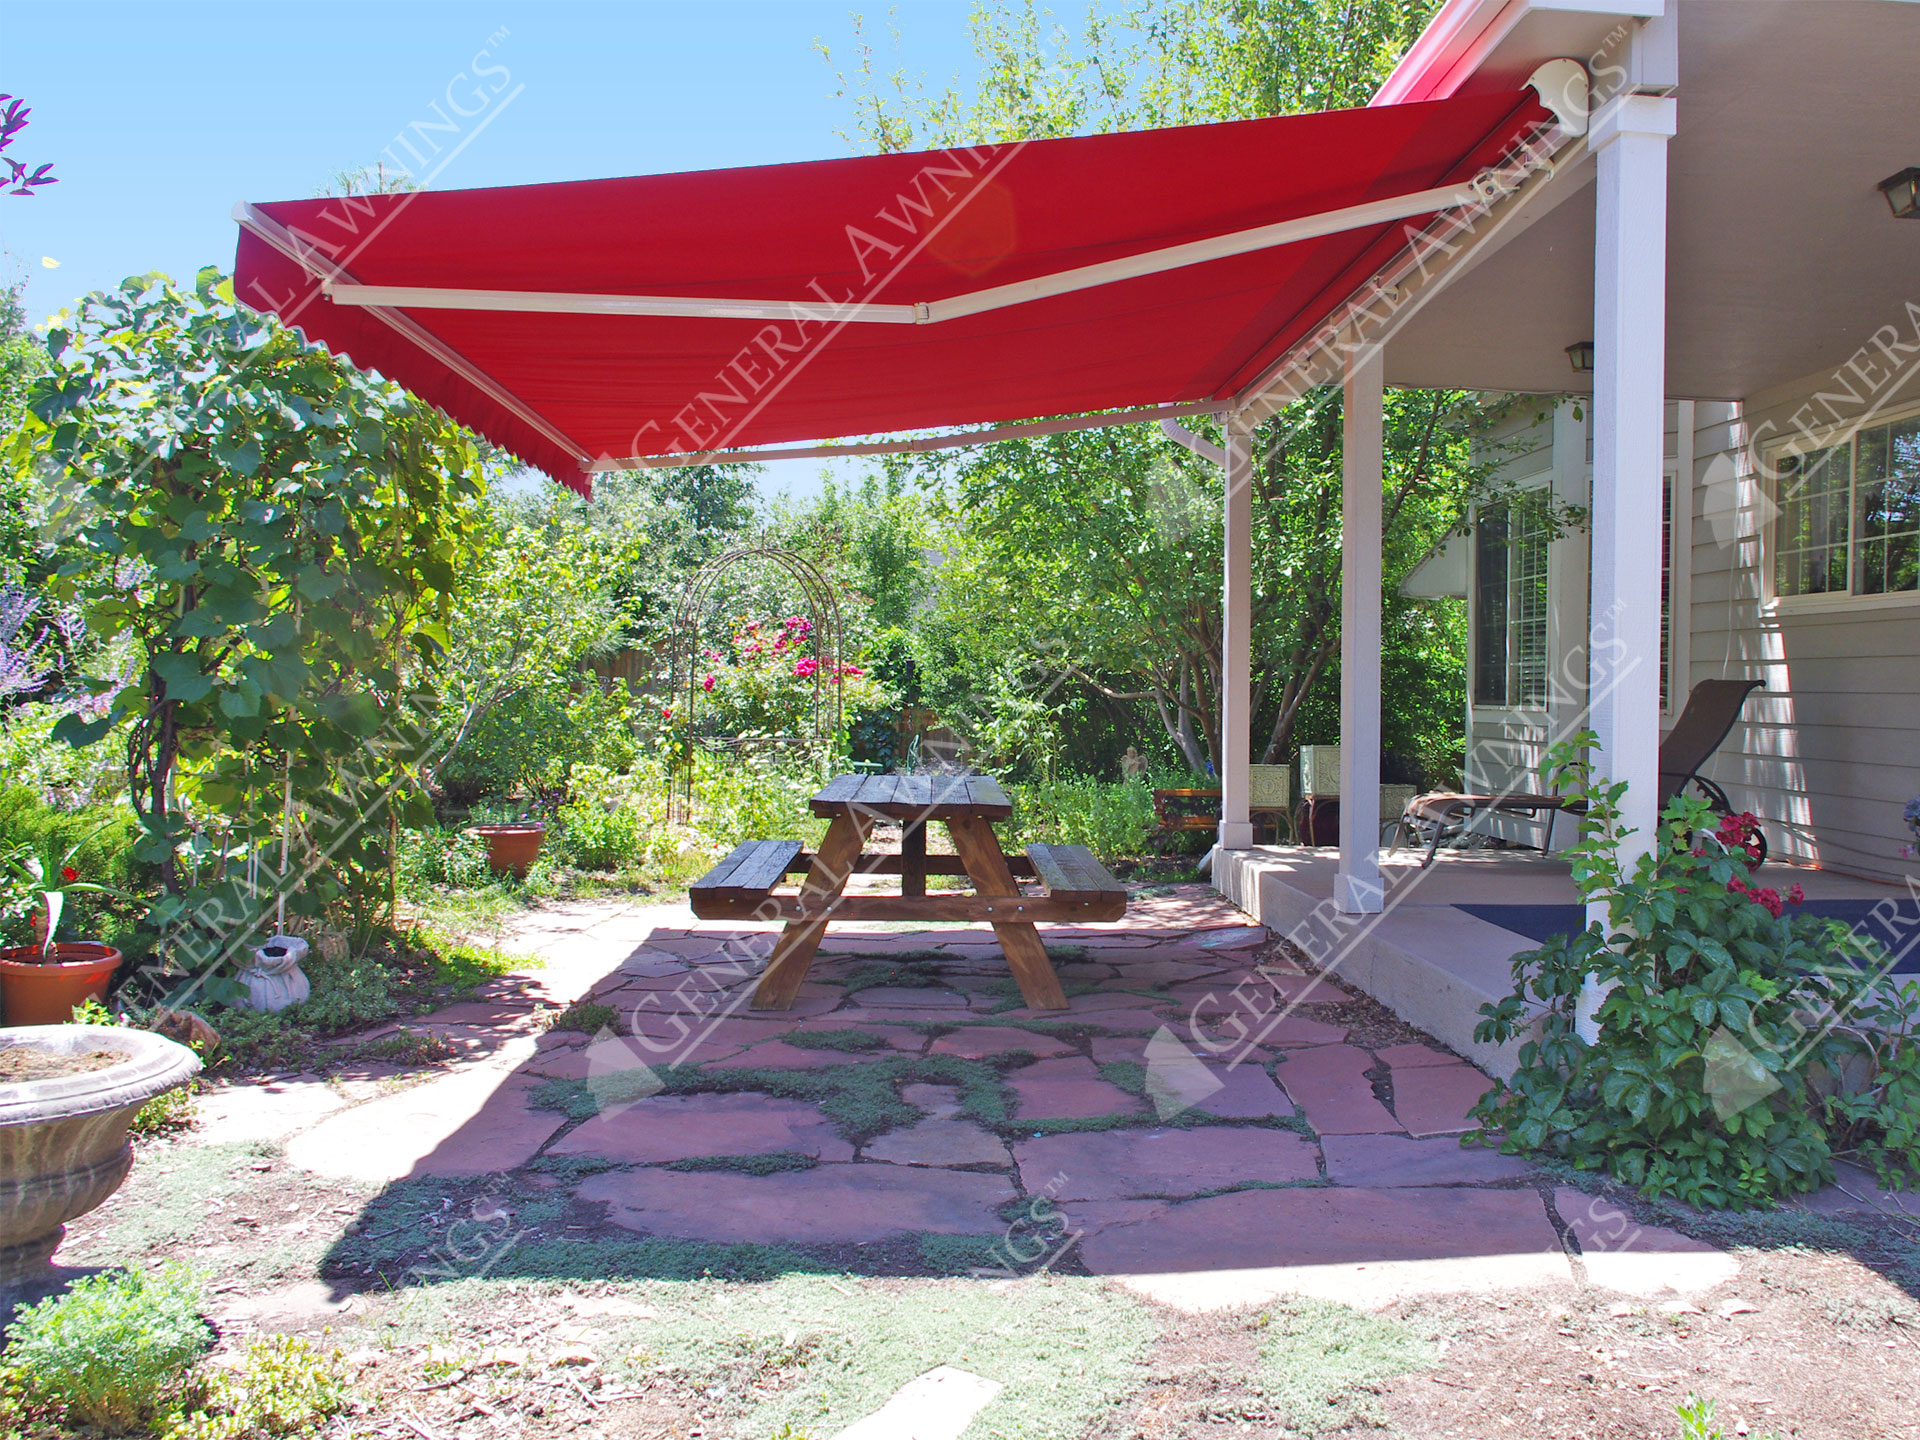 patio awning please select a size before adding to cart MRMQAPS